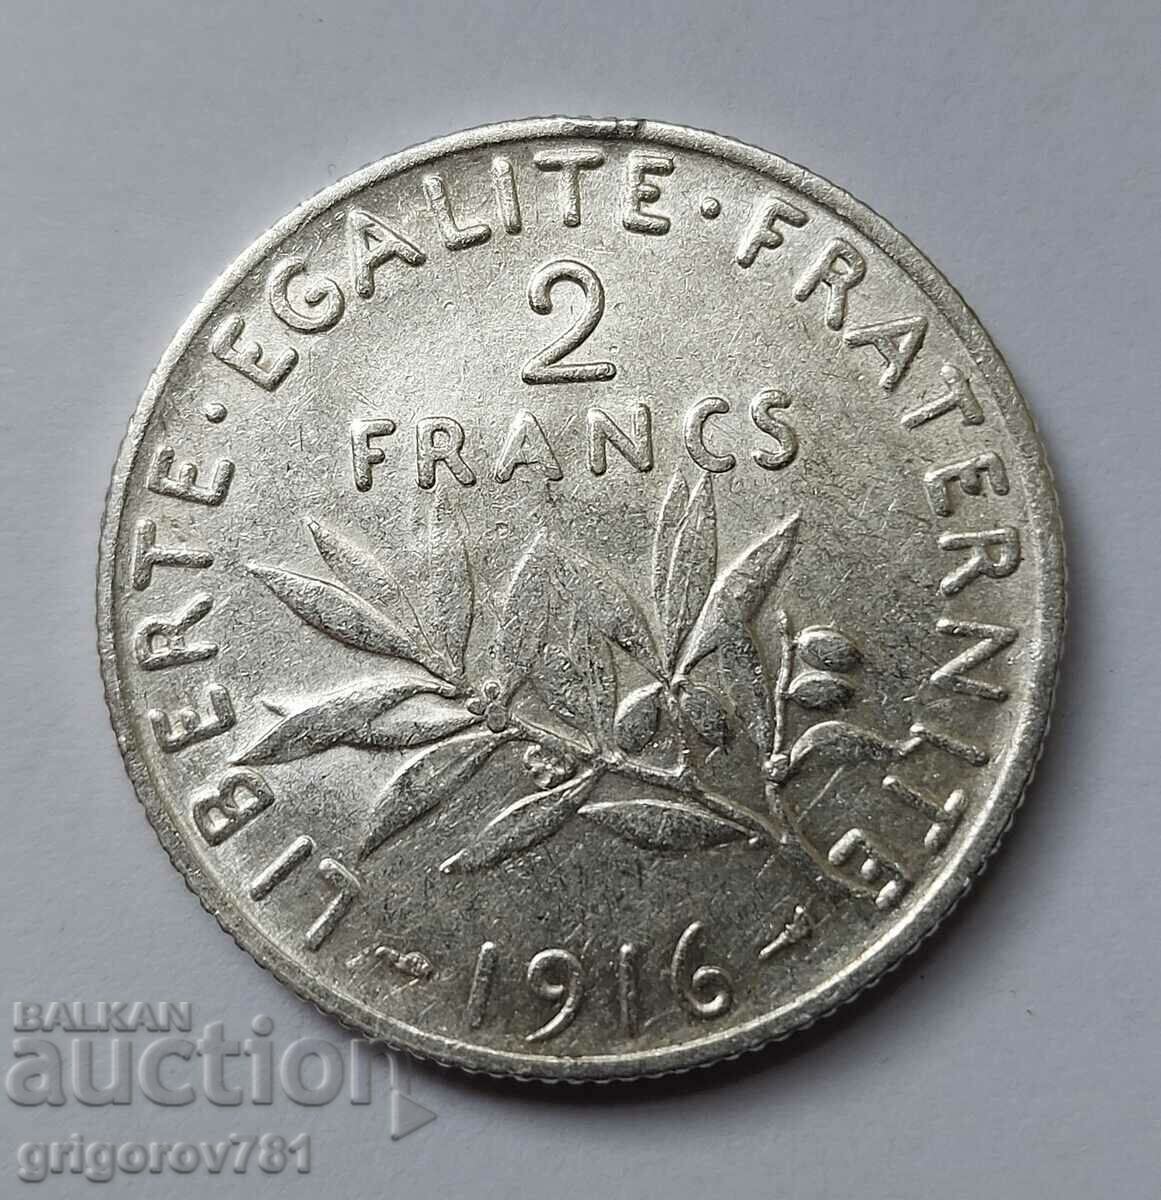 2 Francs Silver France 1916 - Silver Coin #86